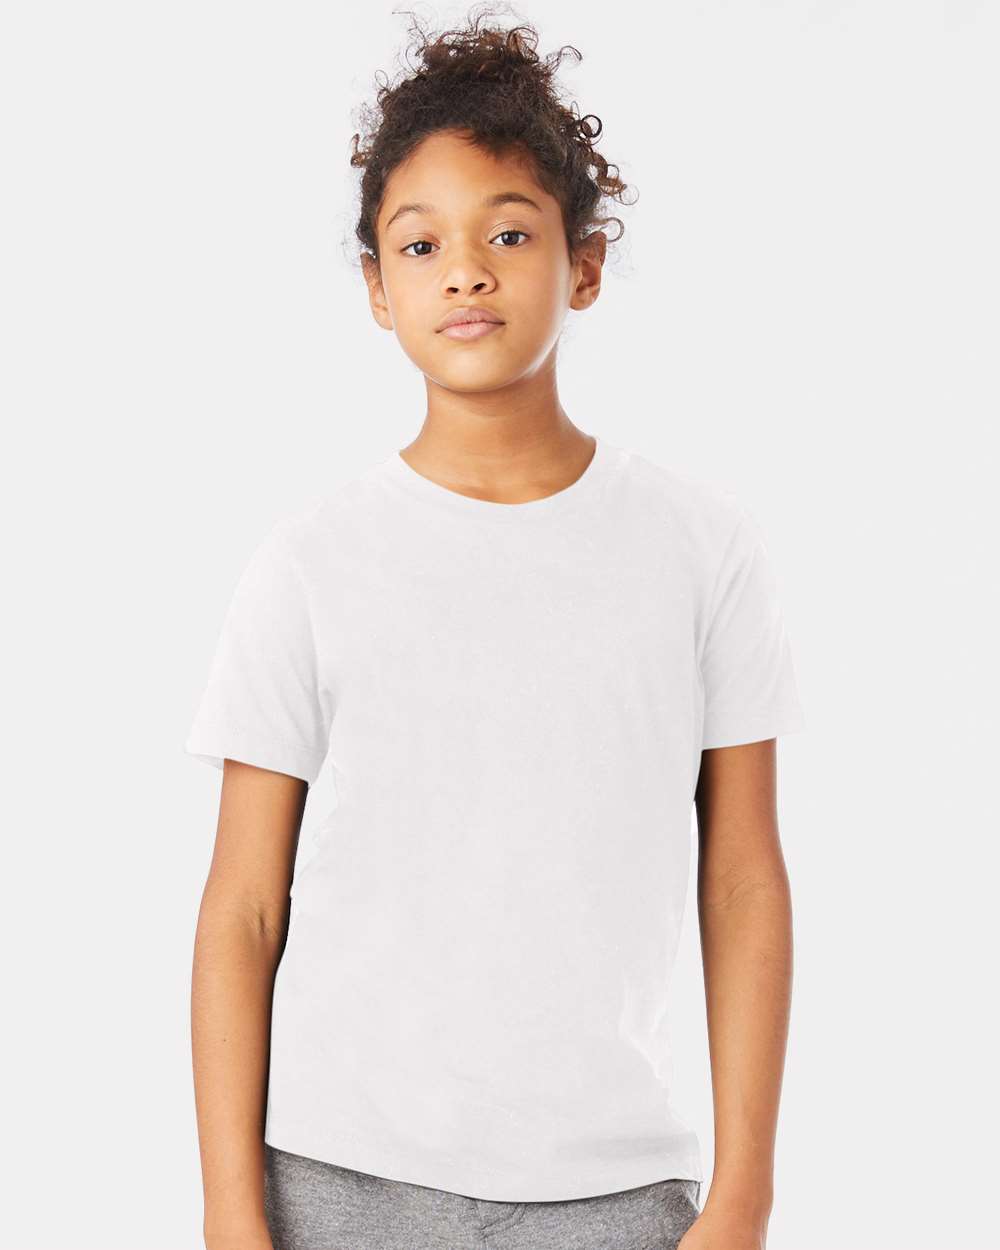 Alternative K1070 - Youth Cotton Jersey Go-To Tee